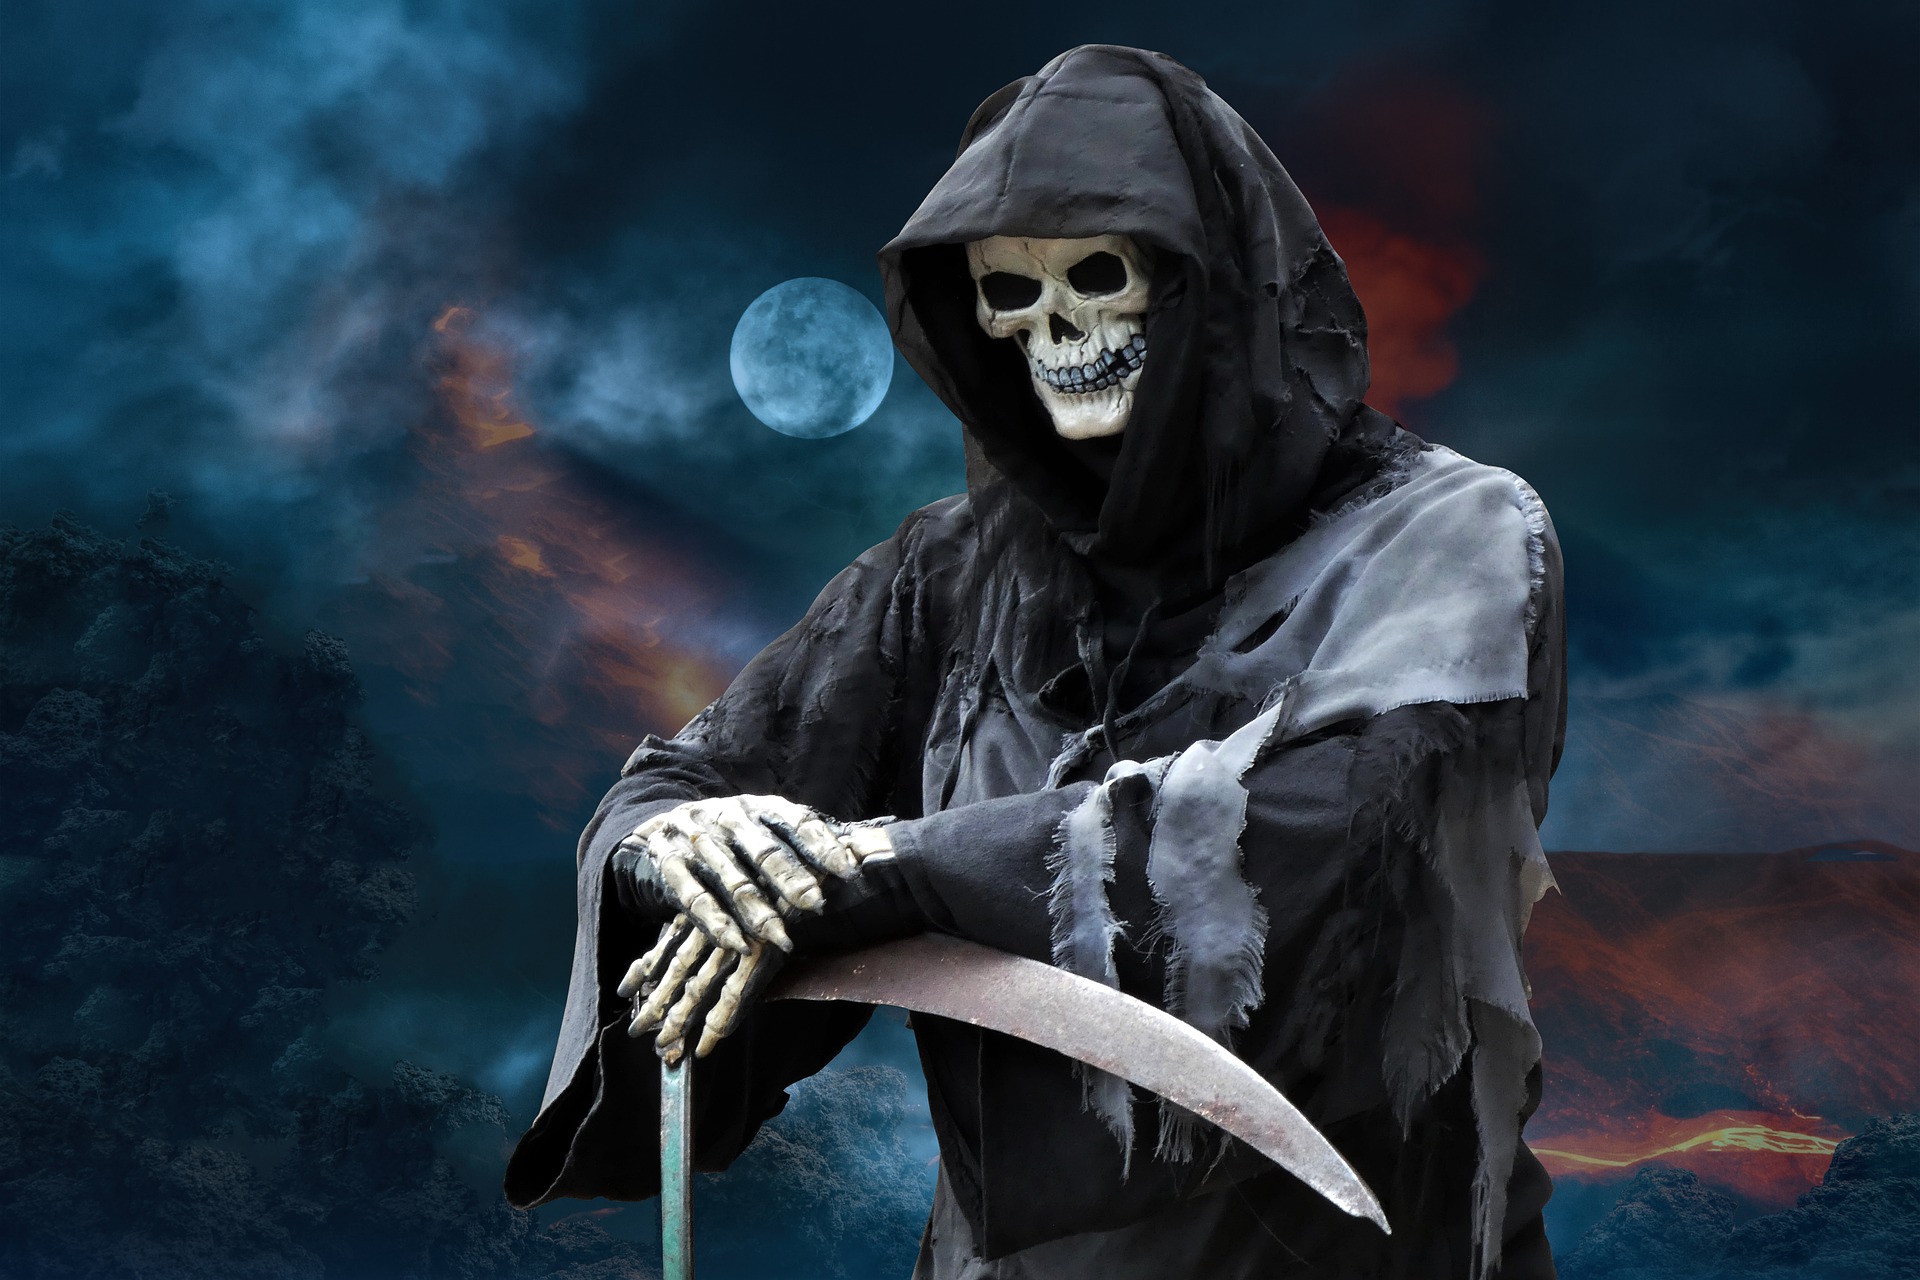 An illustration of the Grim Reaper on a dark cloudy night